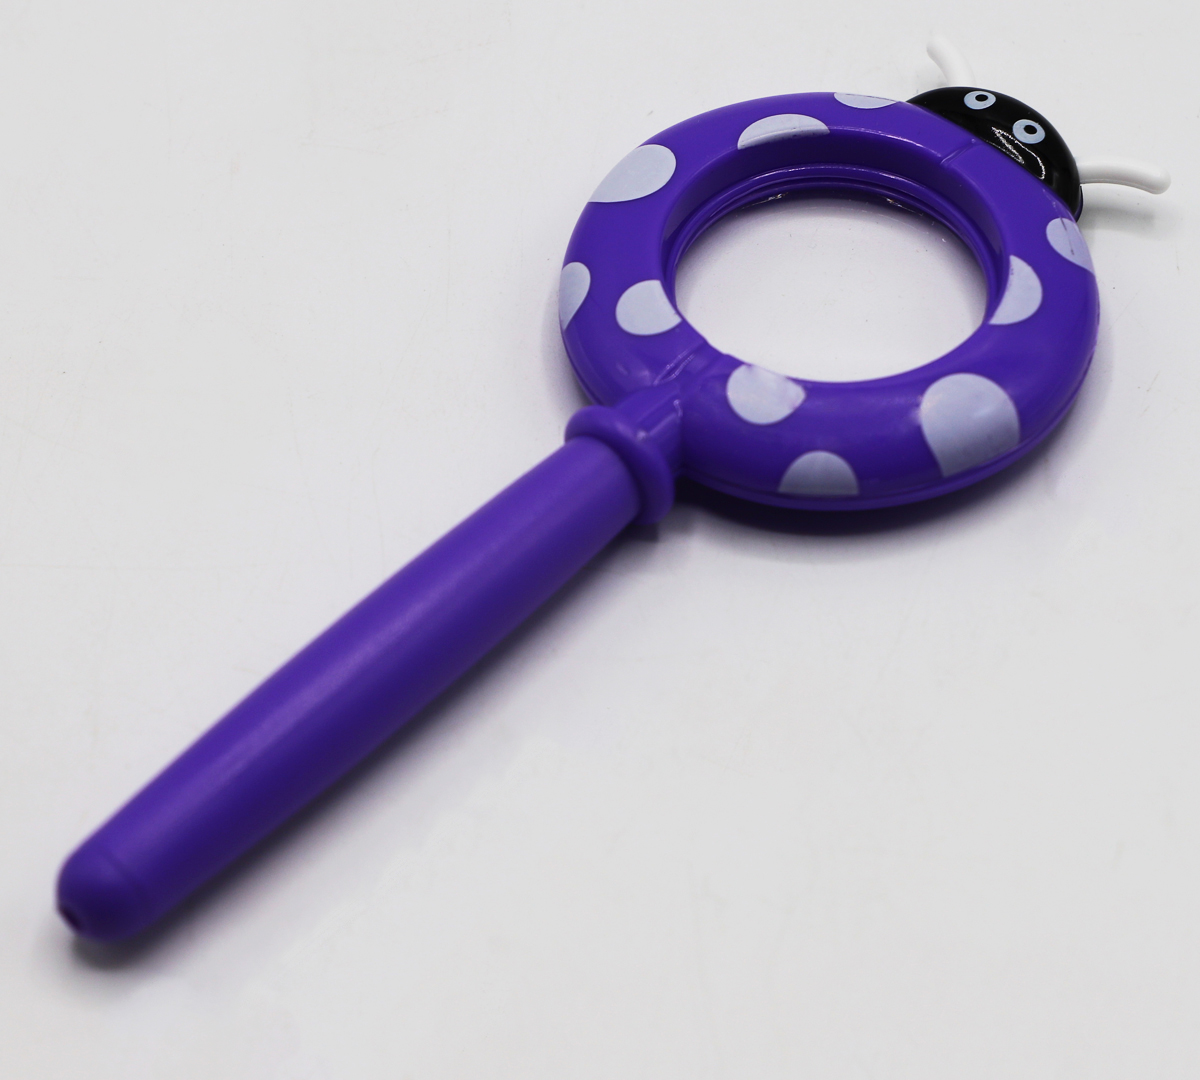 Ladybug magnifying glasses from YIPPEE